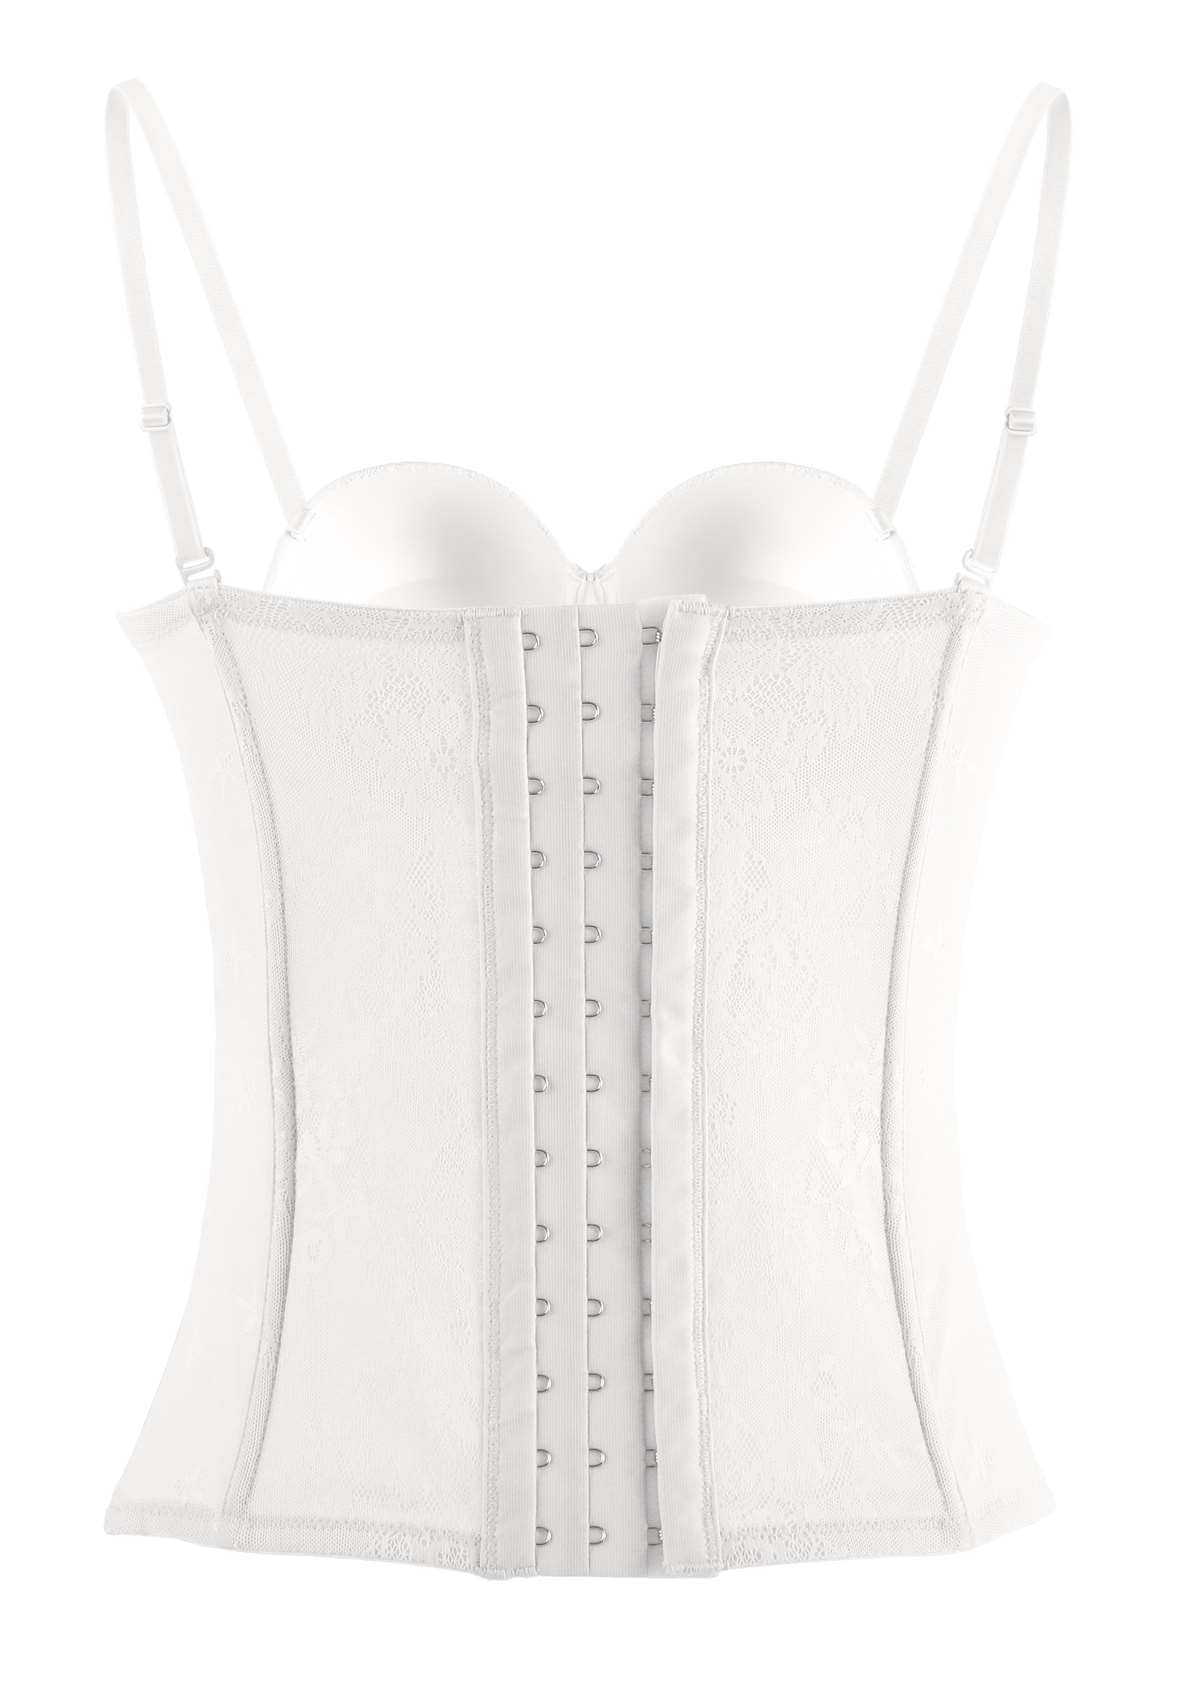 HSIA Gracious Vintage-Inspired Lace Overbust Elegant Corset Bustier - M / White